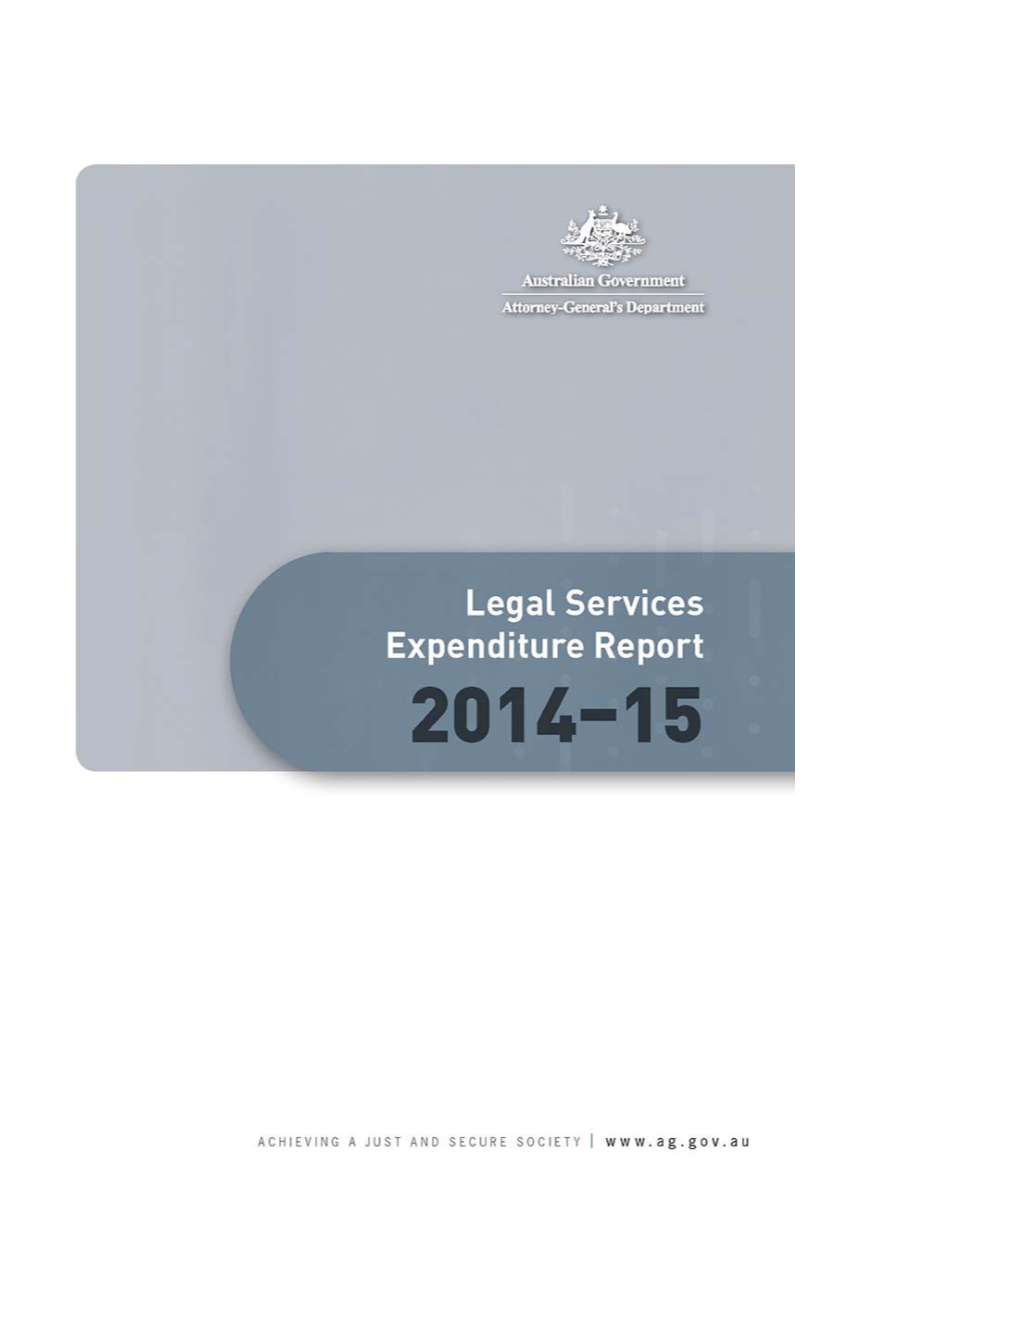 Legal Services Expenditure Report 2014-15